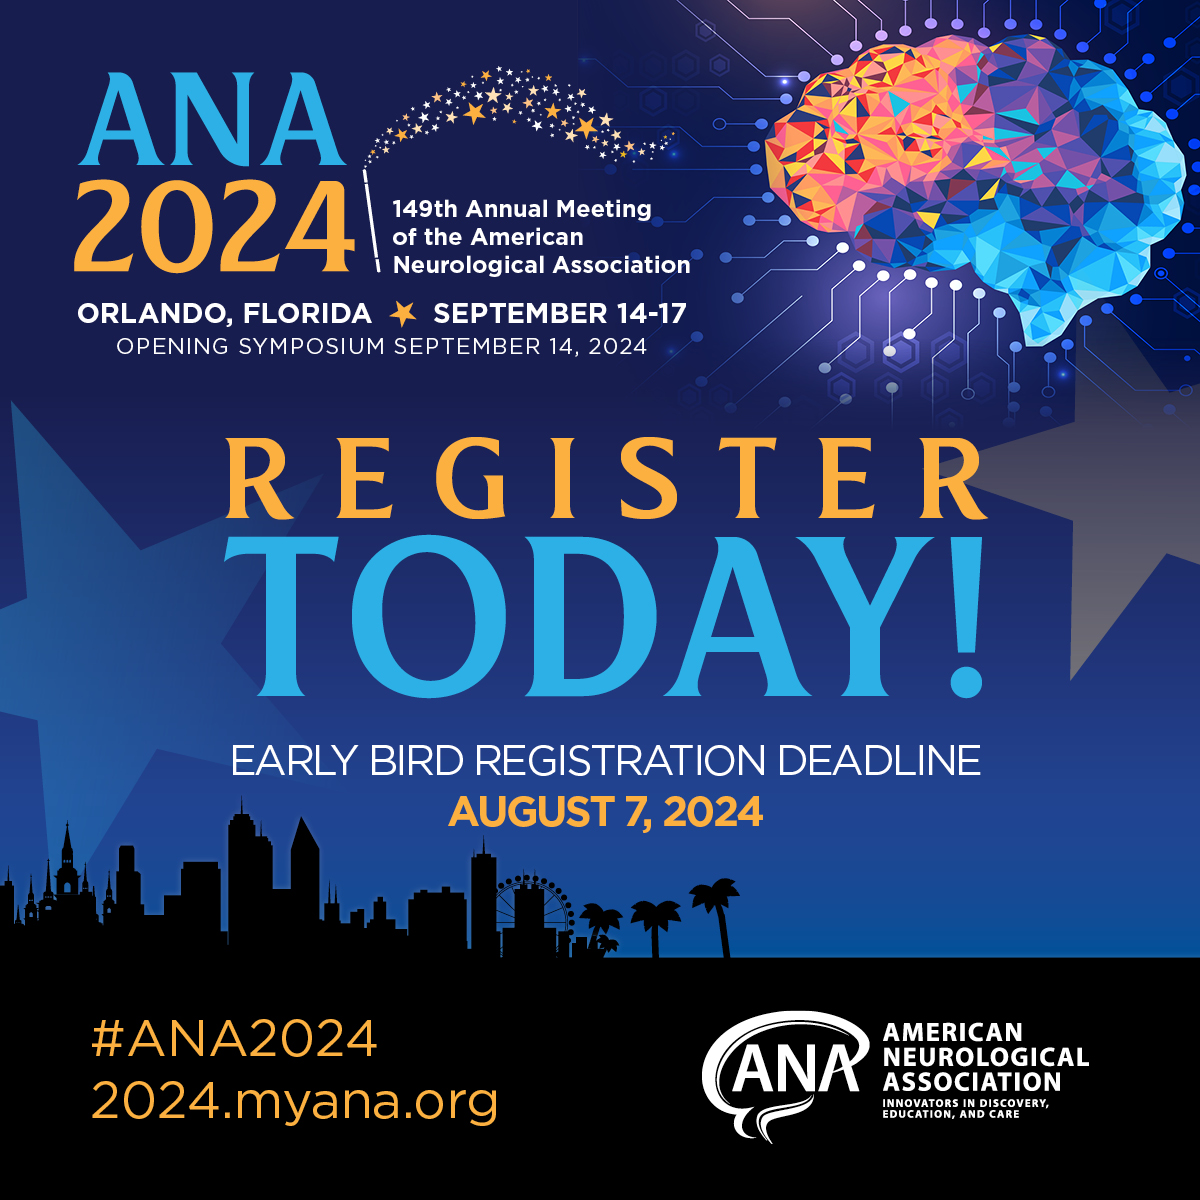 Have you registered for #ANA2024? This year's meeting is going to be exciting as we share outstanding symposia on AI, Neuromodulation, Compartmentalized Inflammation, Encephalitis, and much more! Register today! members.myana.org/site_event_det…